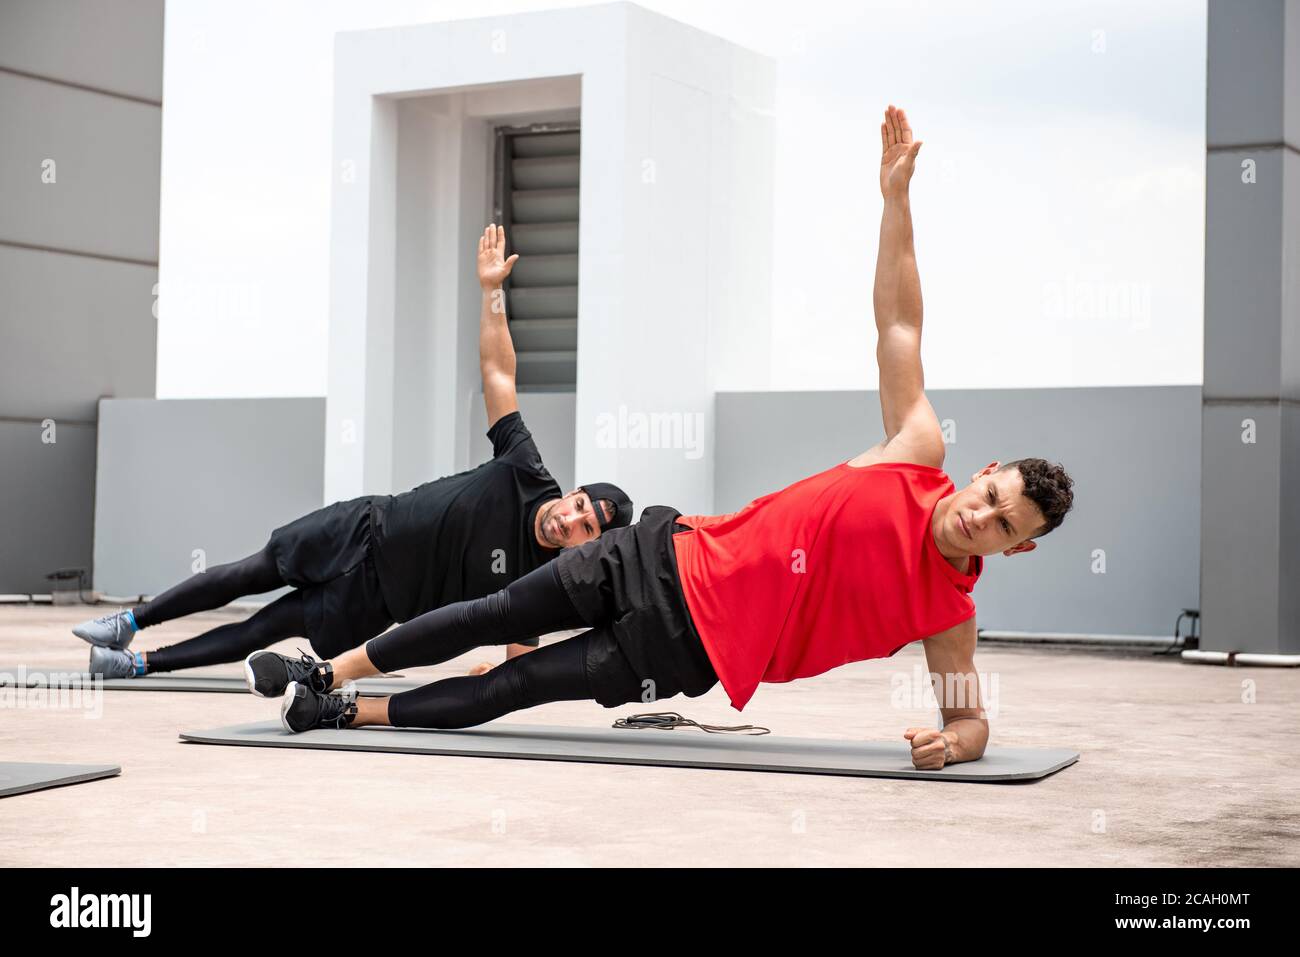 Group of athletic men doing side plank workout exercise outdoors on rooftop floor Stock Photo